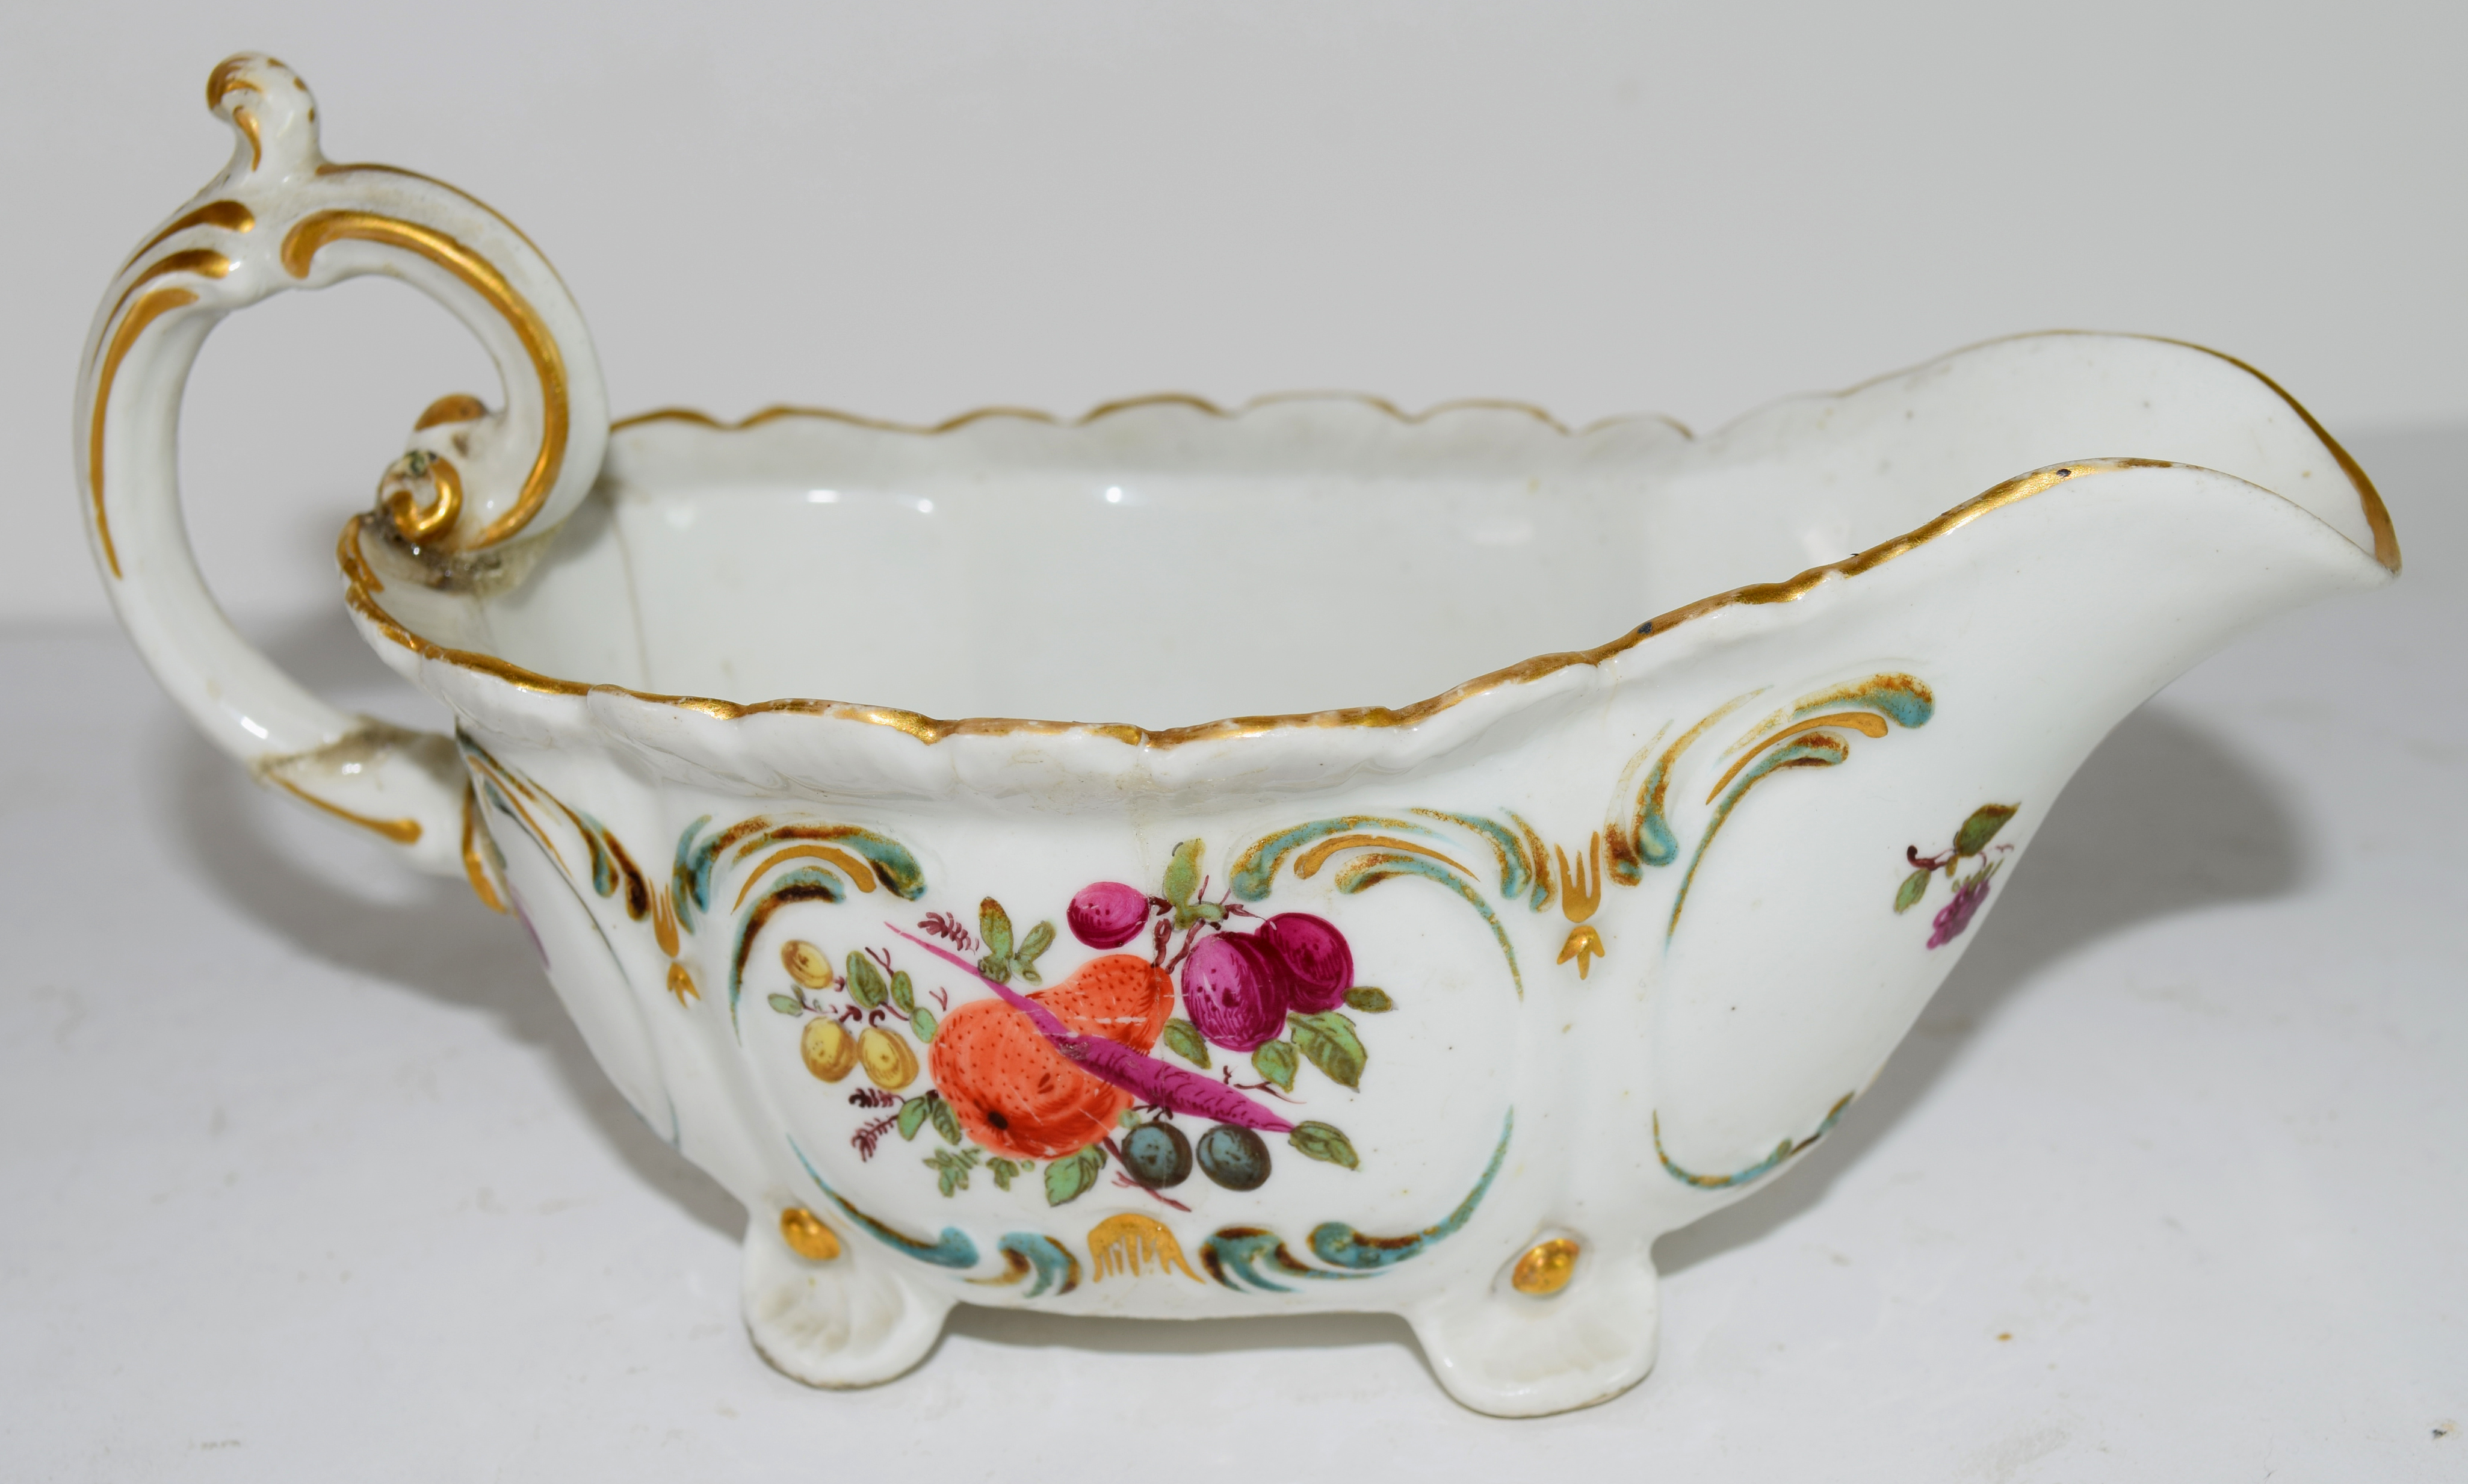 Chelsea Porcelain sauce boat decorated with fruit, gold anchor period (extensively damaged and